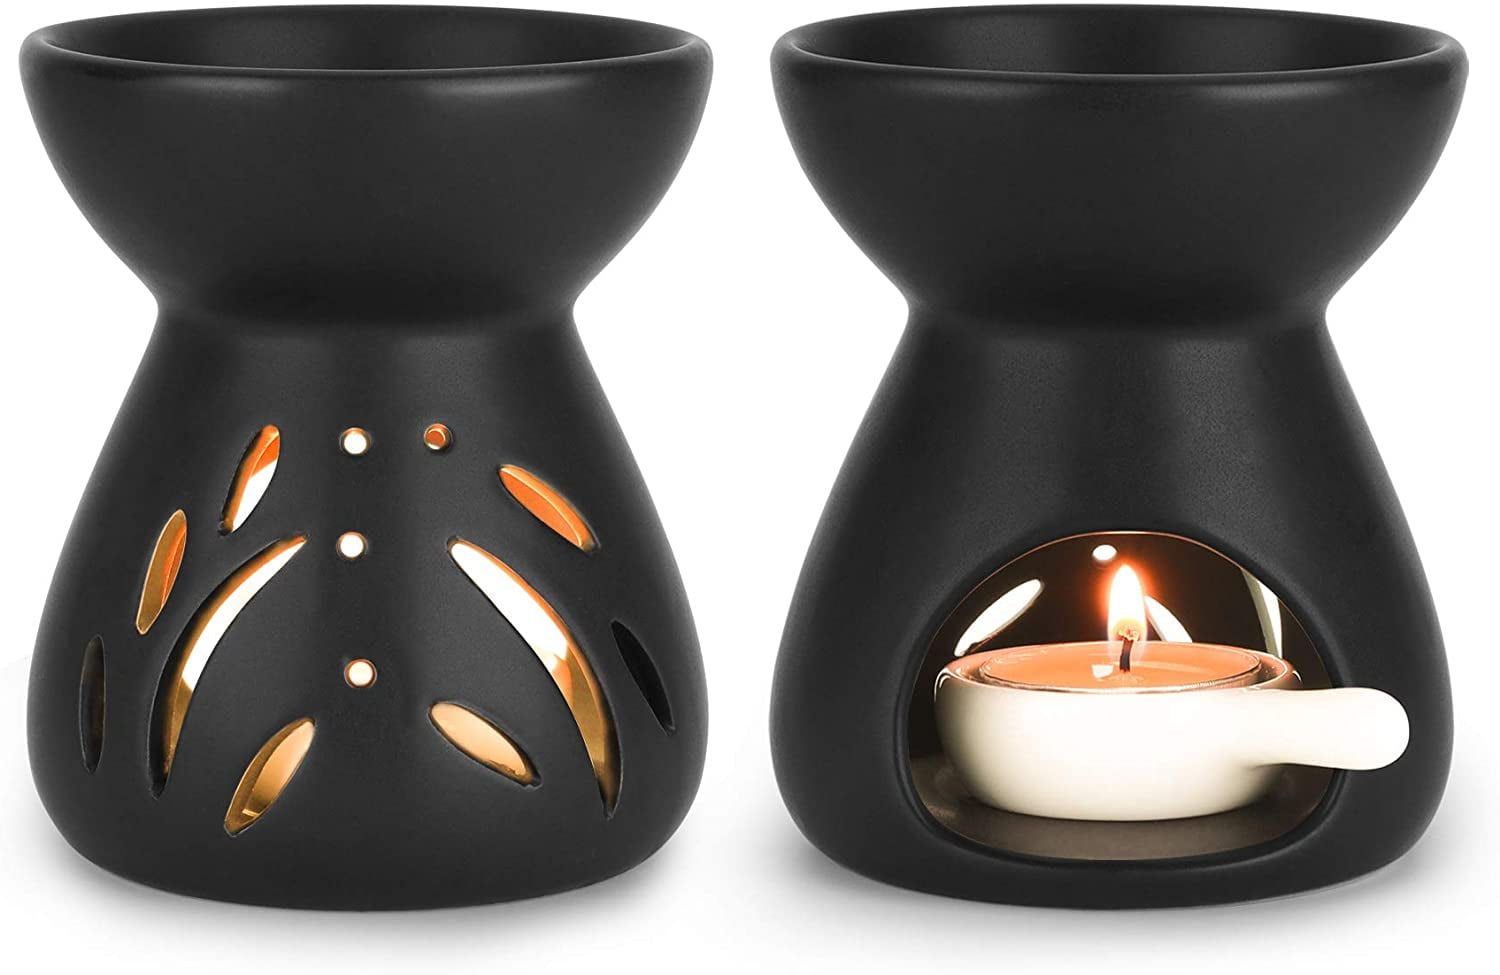 T4U Ceramic Buddha Head Essential Oil Burner with Candle Spoon Black Set of 2 Aromatherapy Wax Melt Burners Oil Diffuser Tealight Candle Holders Buddha Ornament for Yoga Spa Home Bedroom Decor Gift